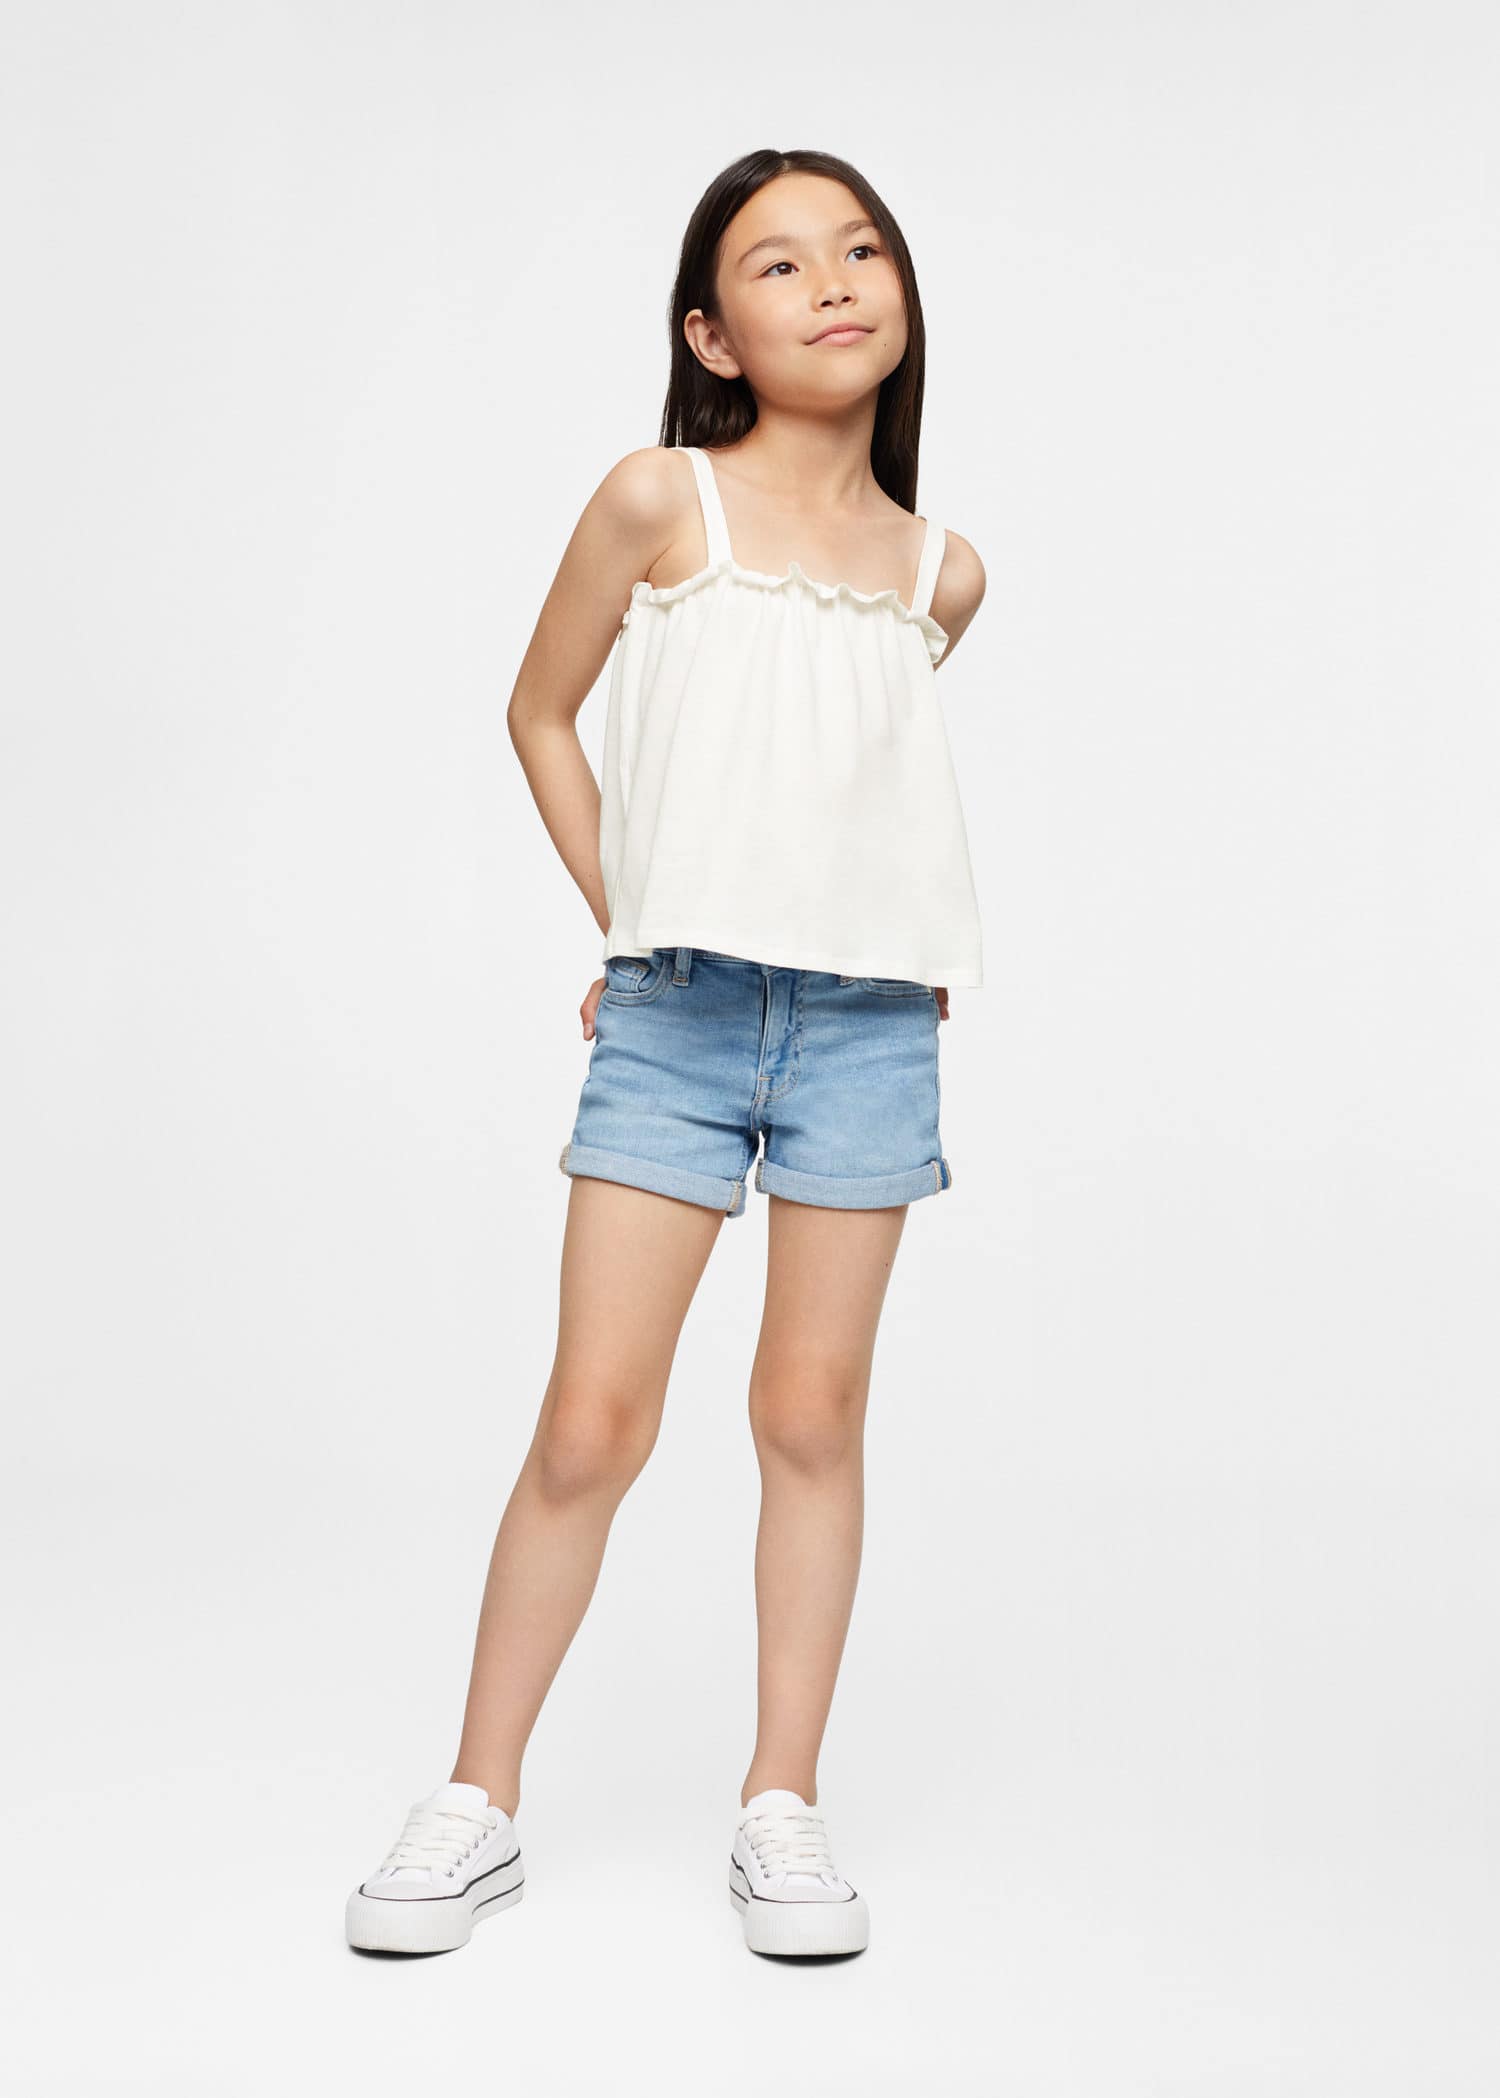 Girls's Fashion Outlet | Mango Outlet USA 童装额外8折 CODE EXTRA20